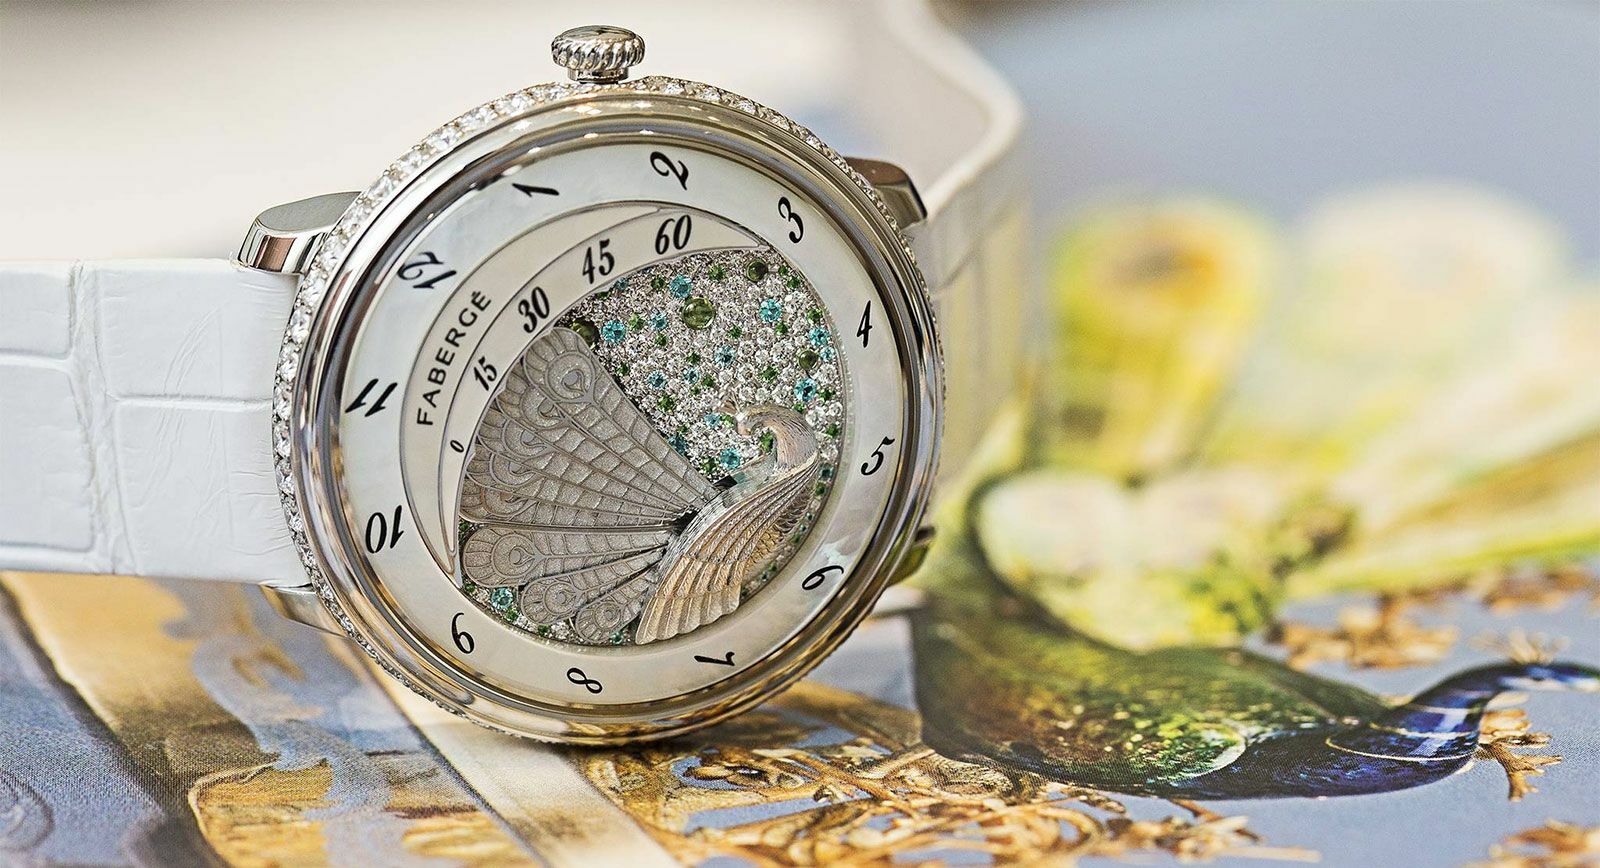 Lady Compliquée from Fabergé – a Combination of Exceptional Design and Top Watchmaking Craft